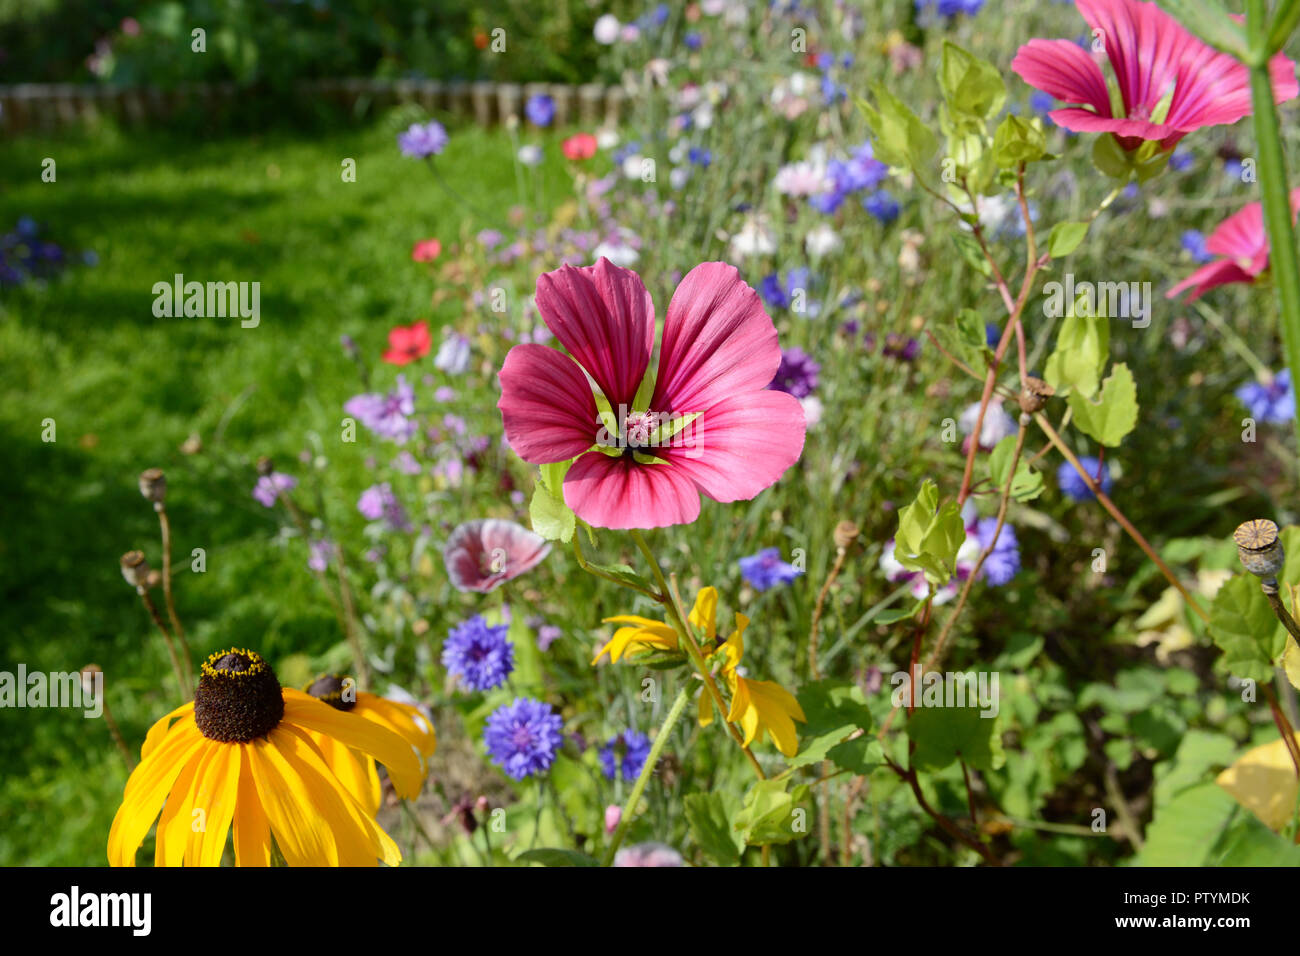 Pink malope trifida - mallow wort - and yellow rudbeckia flowers - coneflower - among wildflowers in a garden Stock Photo